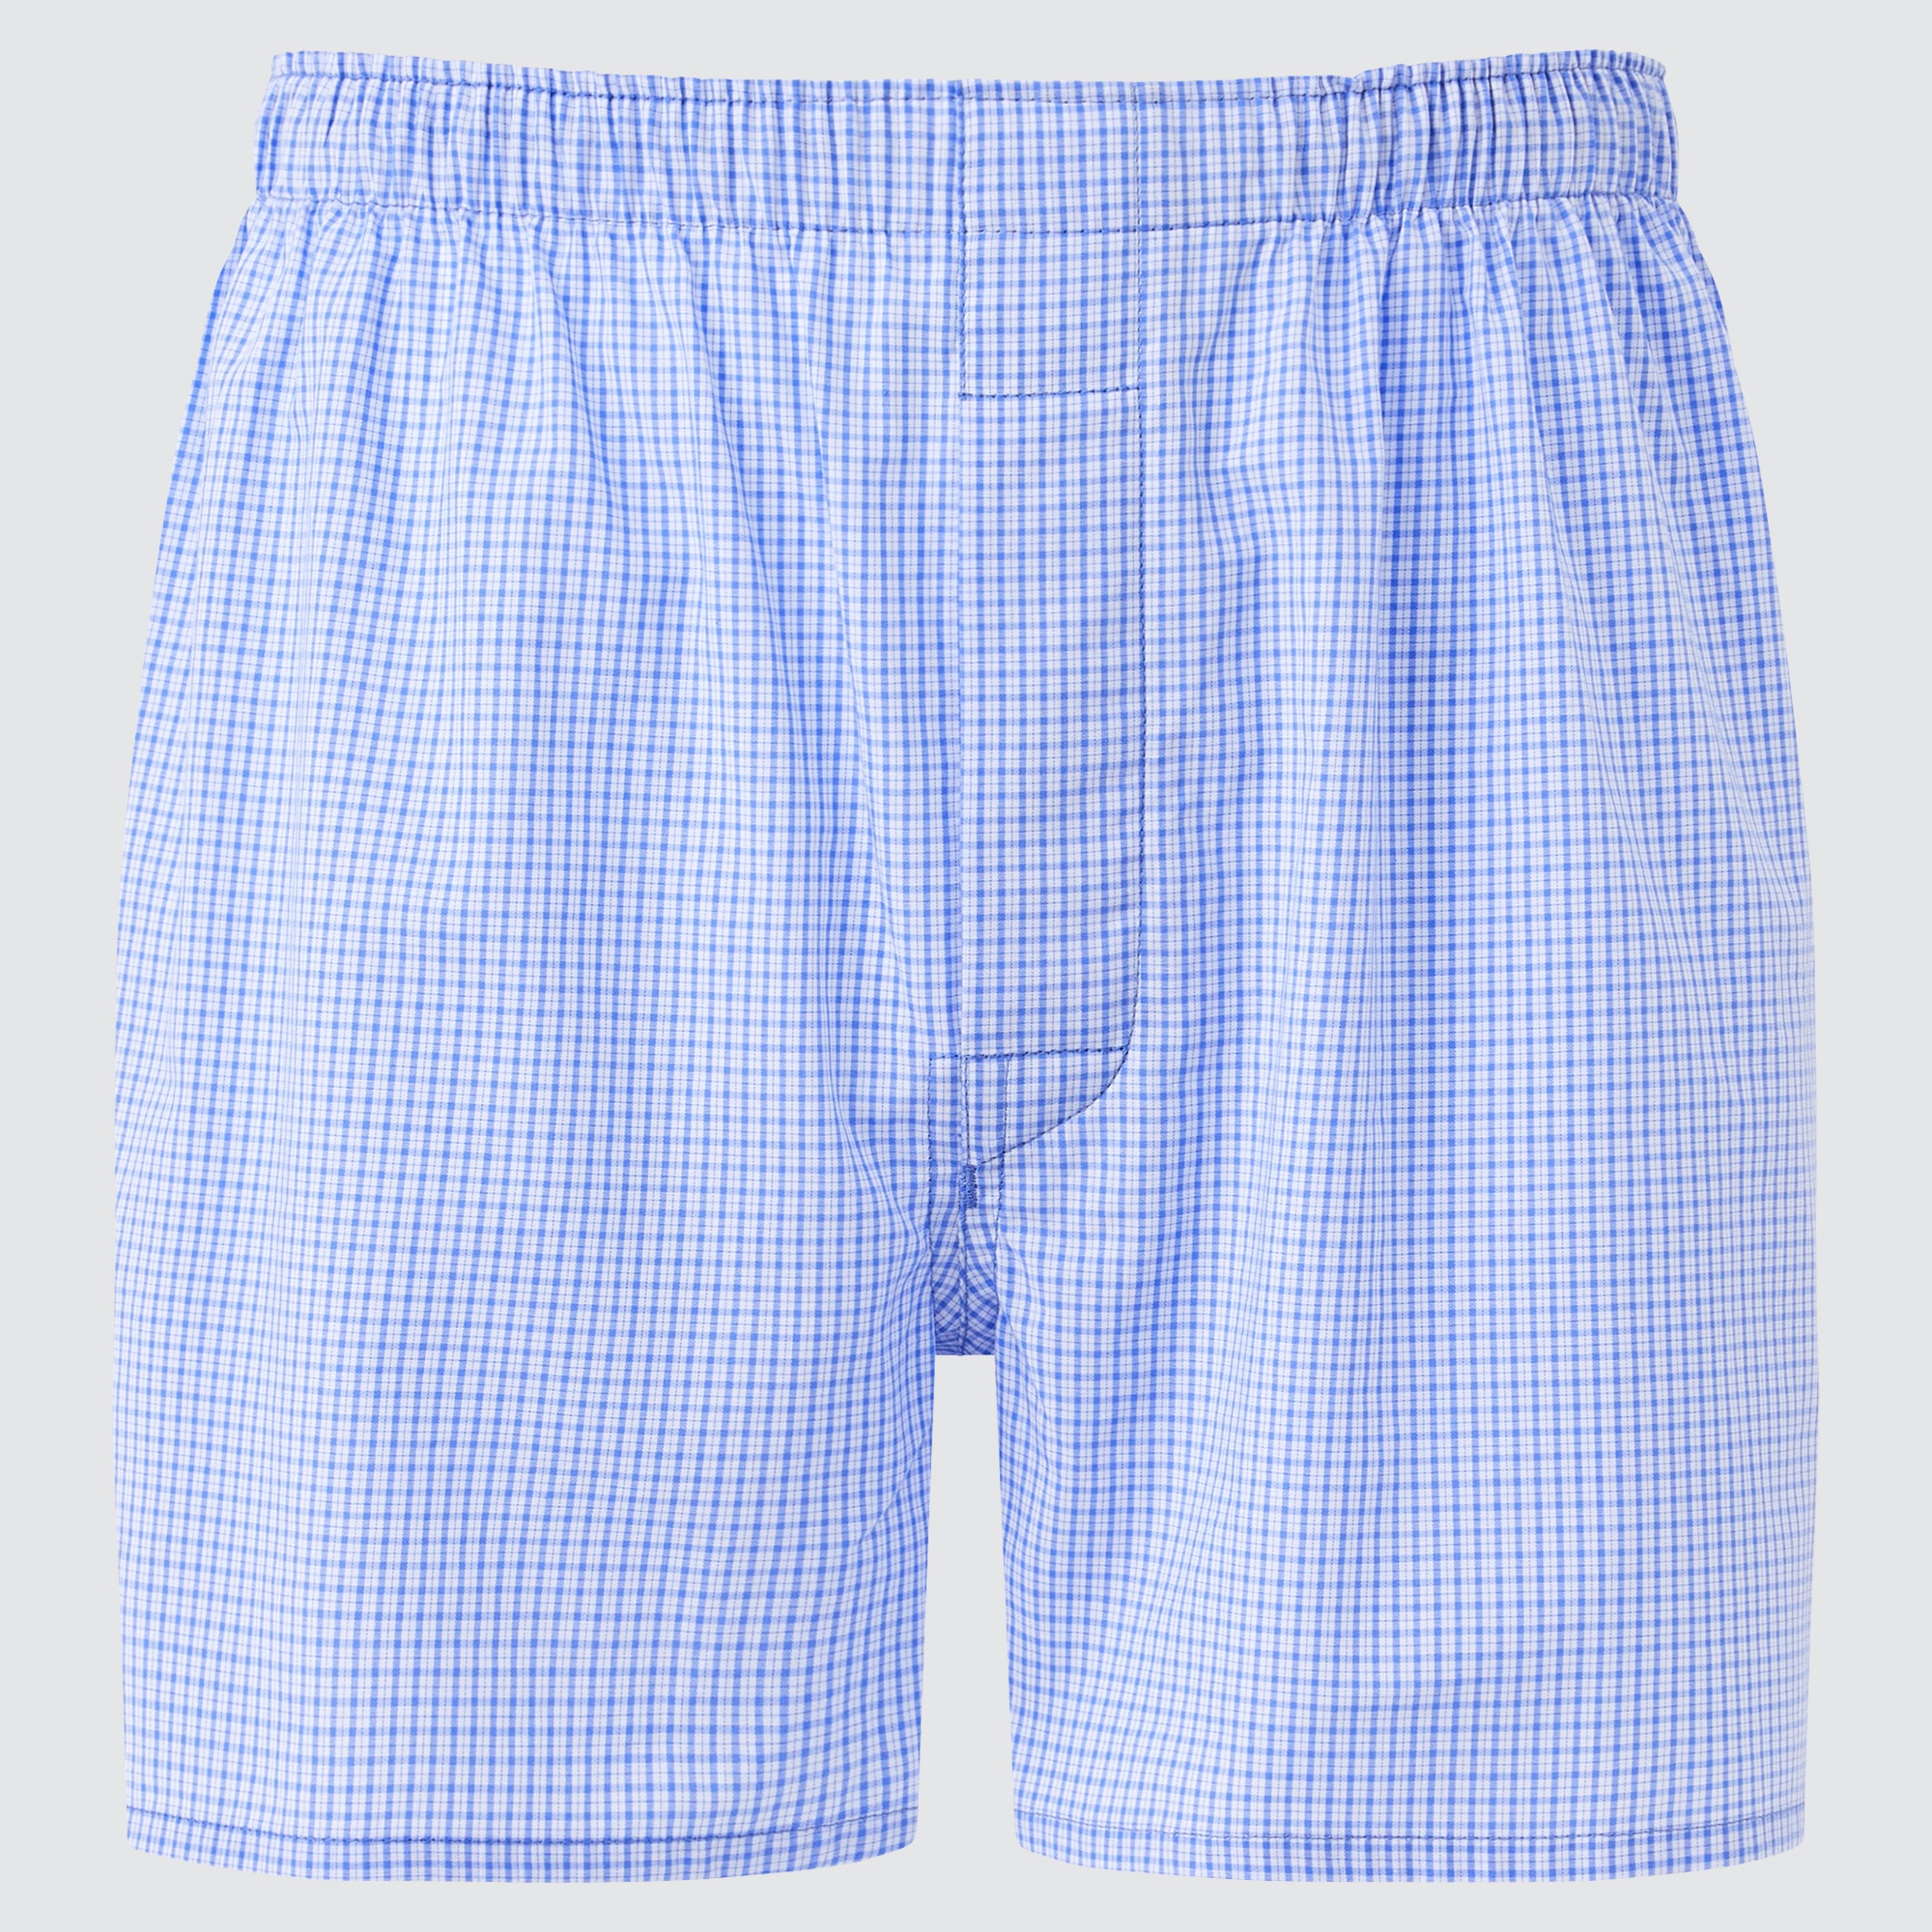 UNIQLO Woven Checked Boxers | StyleHint